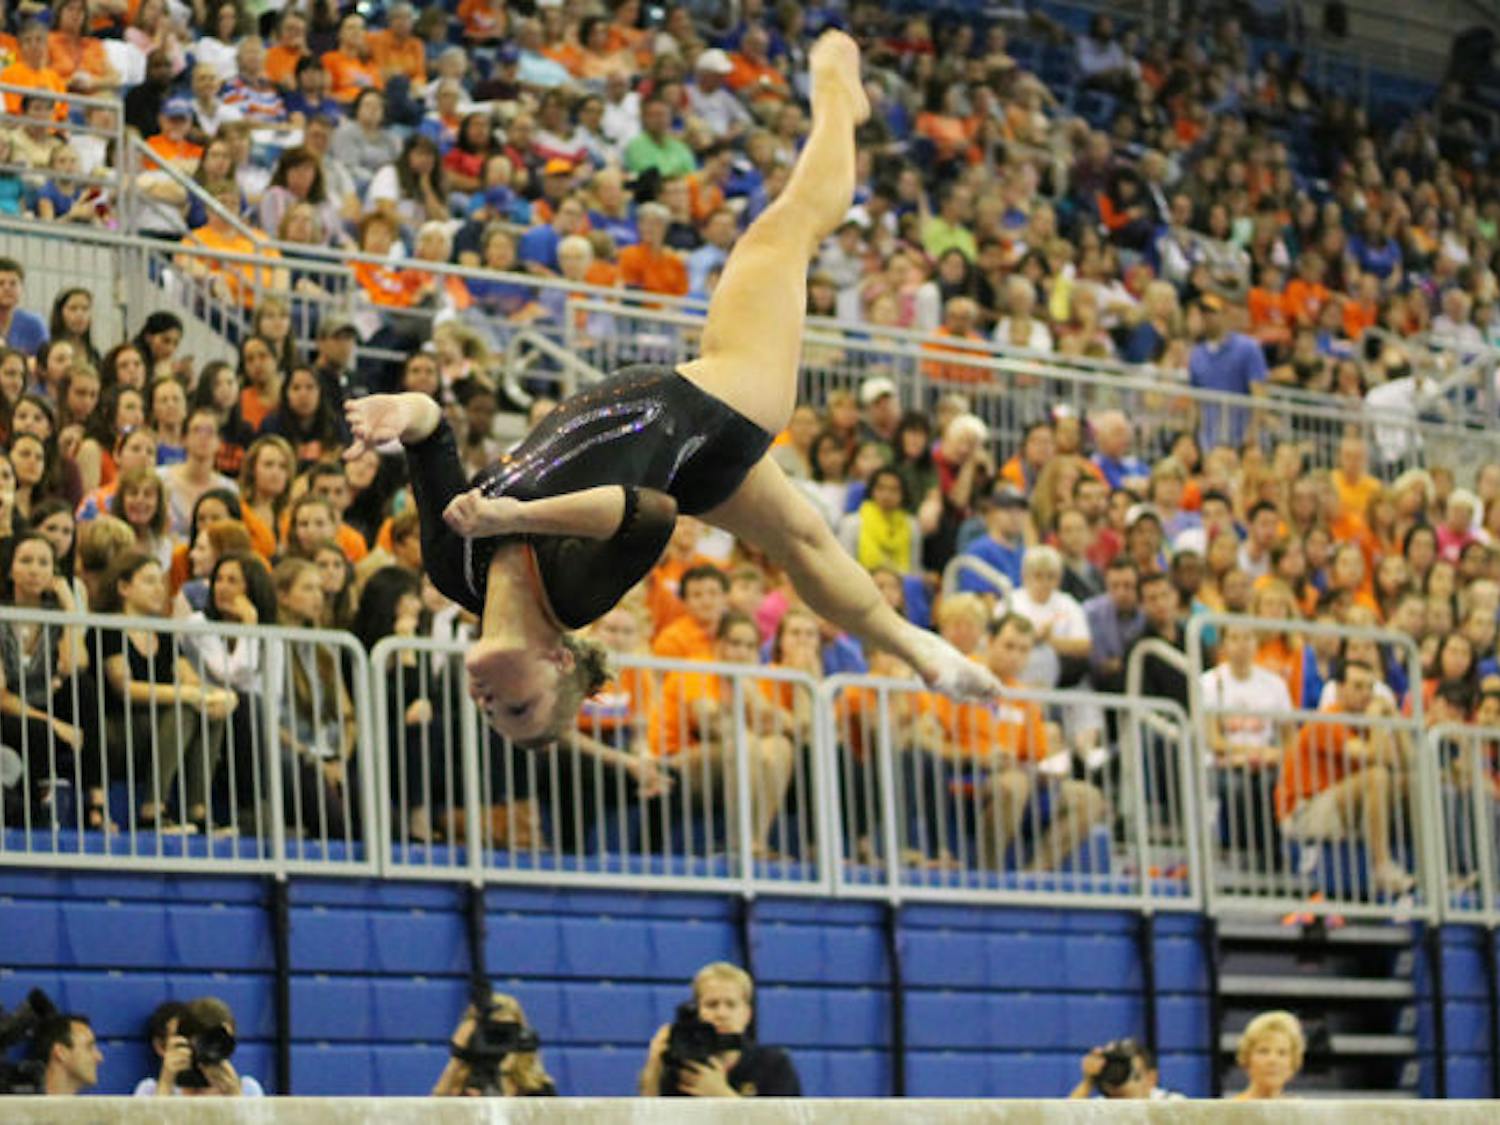 Freshman gymnast Bridget Sloan&nbsp; performs a flip on the balance beam during Florida’s 196.975-196.075 win against Kentucky on Feb. 22 in the O’Connell Center.